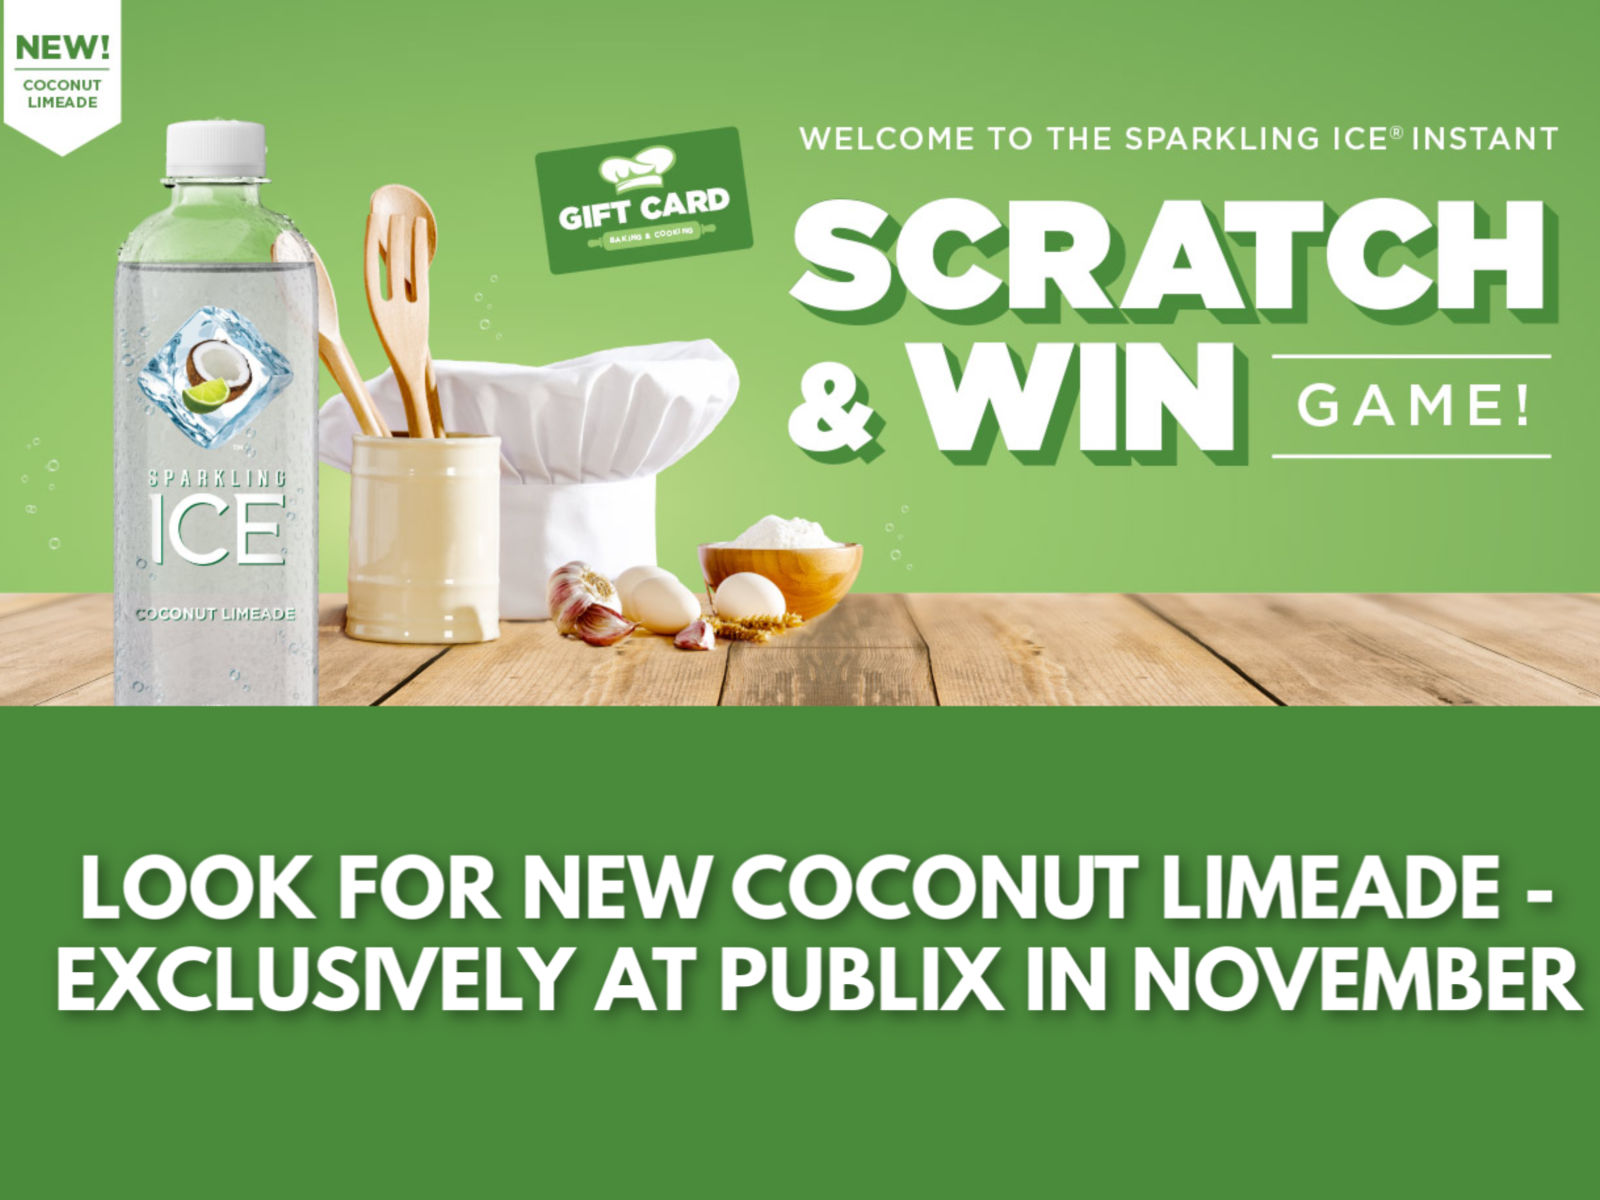 Look For New Sparkling Ice Coconut Limeade At Publix & Play The New Game For A Chance To Win BIG Prizes!